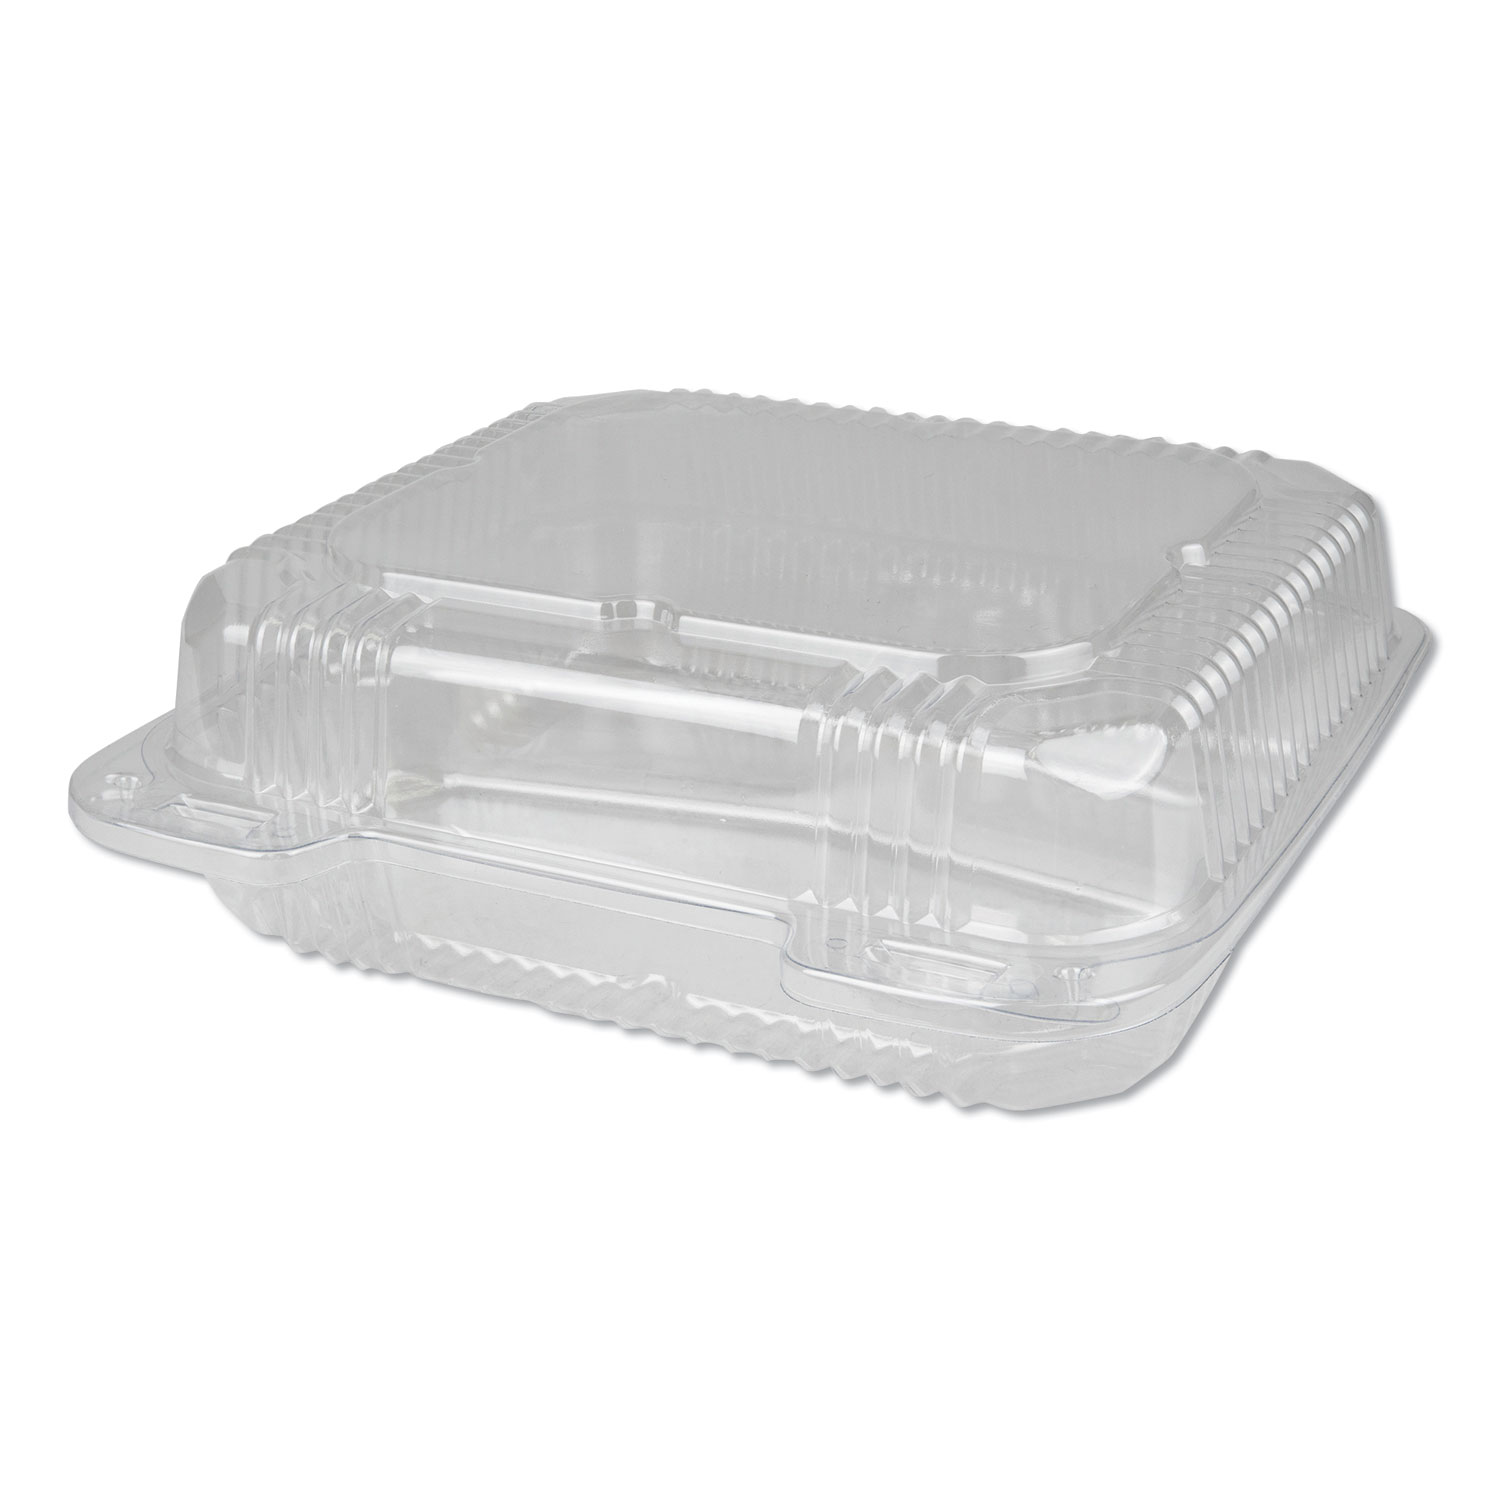  Durable Packaging PXT883 Plastic Clear Hinged Containers, 8 x 8, 3-Compartment, 5 oz; 5 oz; 15 oz, Clear, 250/Carton (DPKPXT833) 